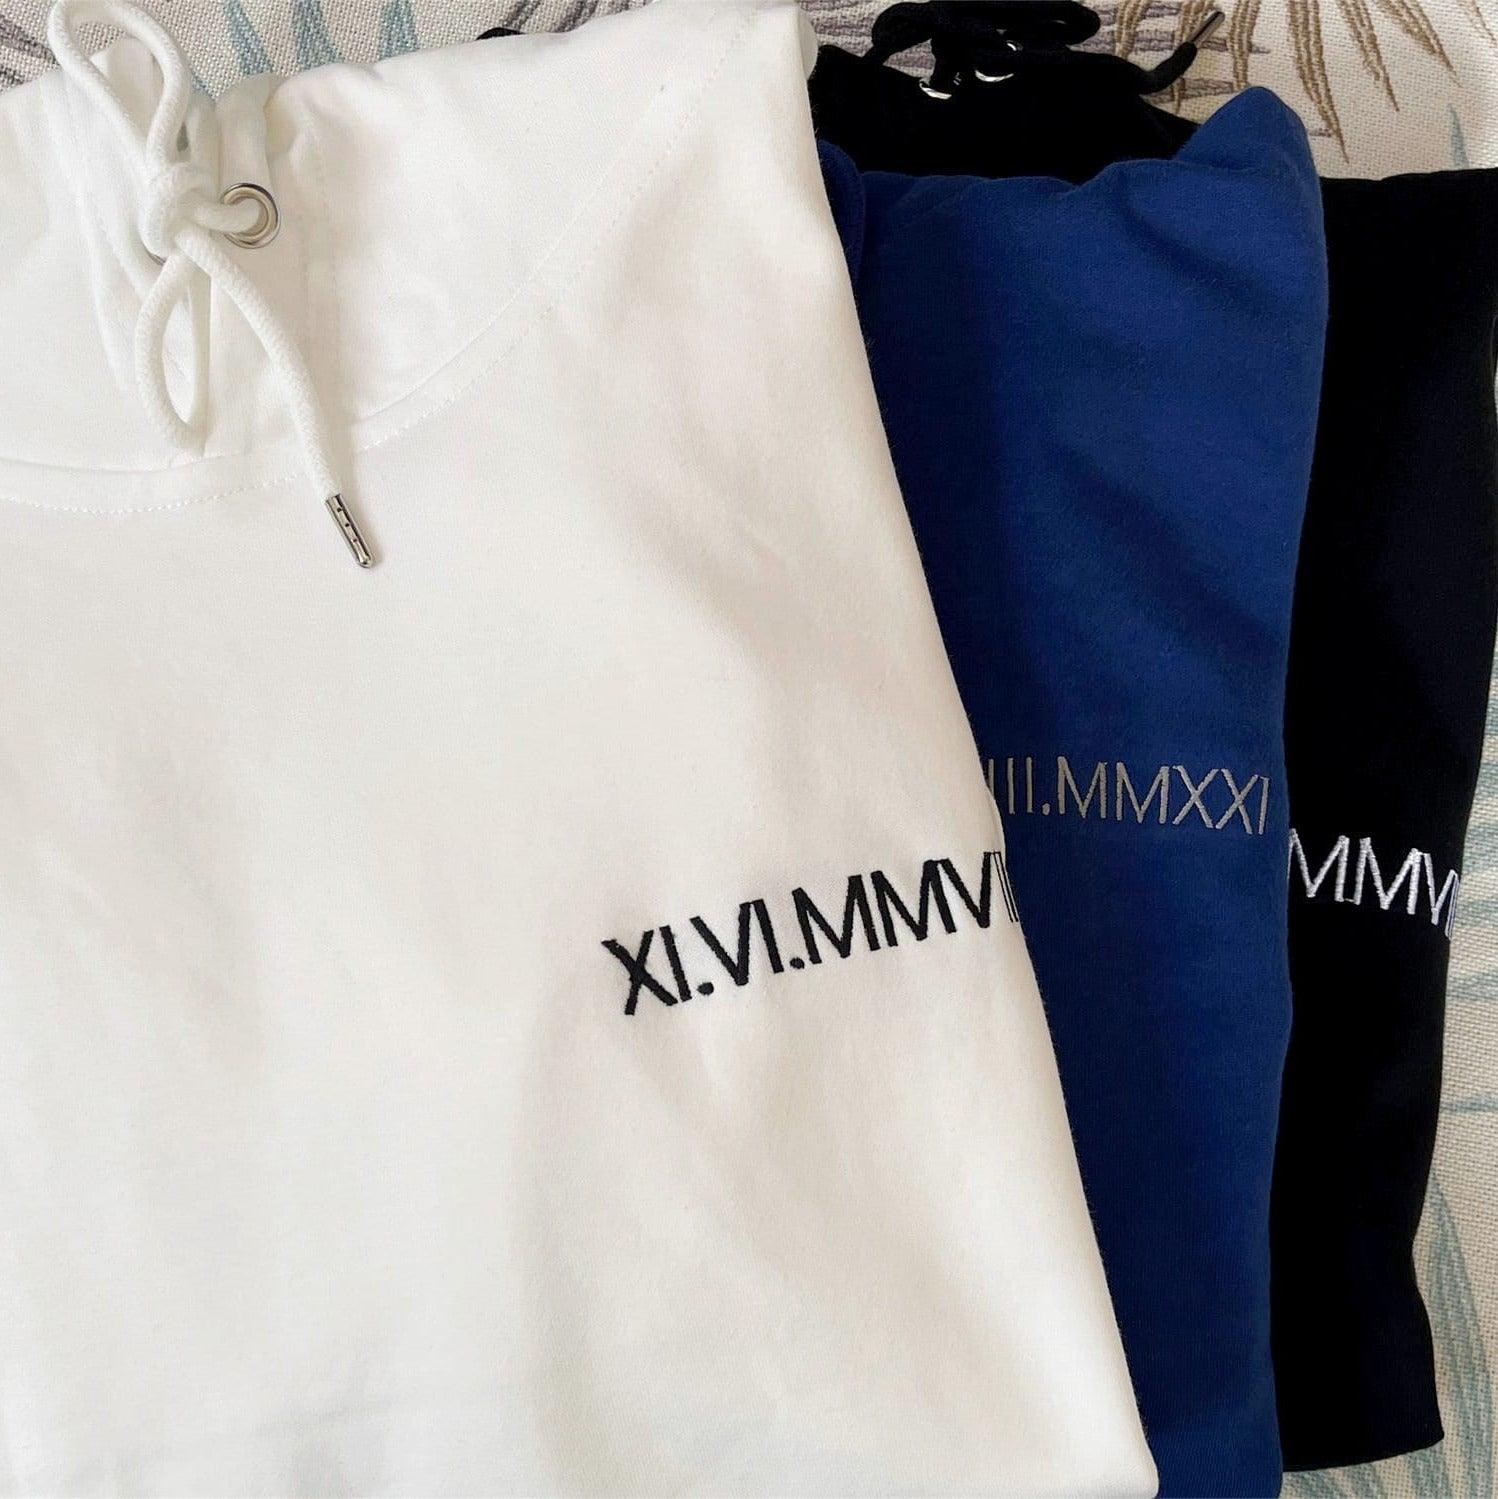 Personalized Roman Numeral Couple Matching Embroidered Sweatshirt Hoodie